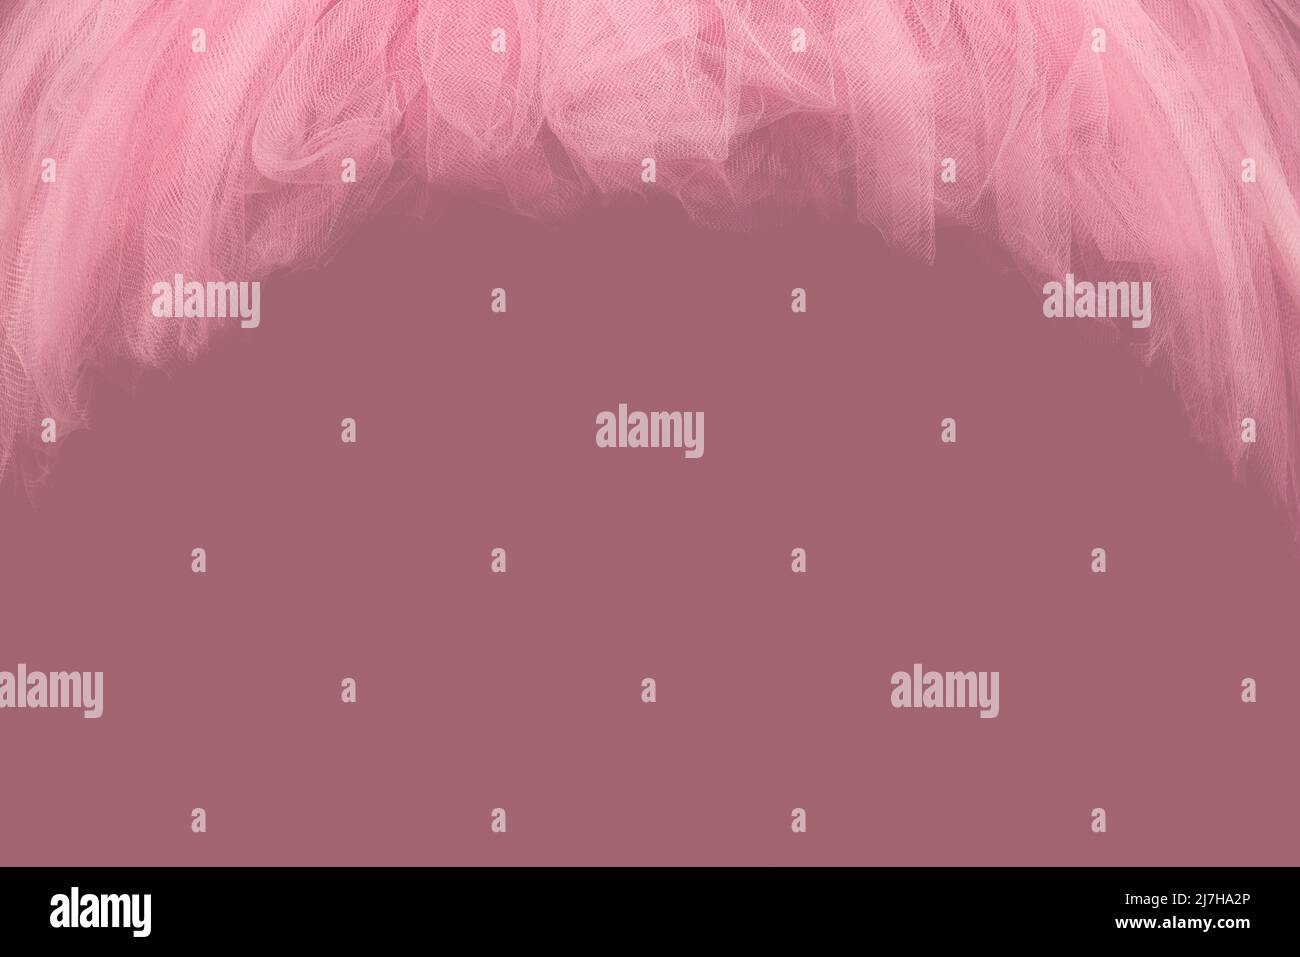 Pink tule tutu fabric used for graphic border frames Stock Photo